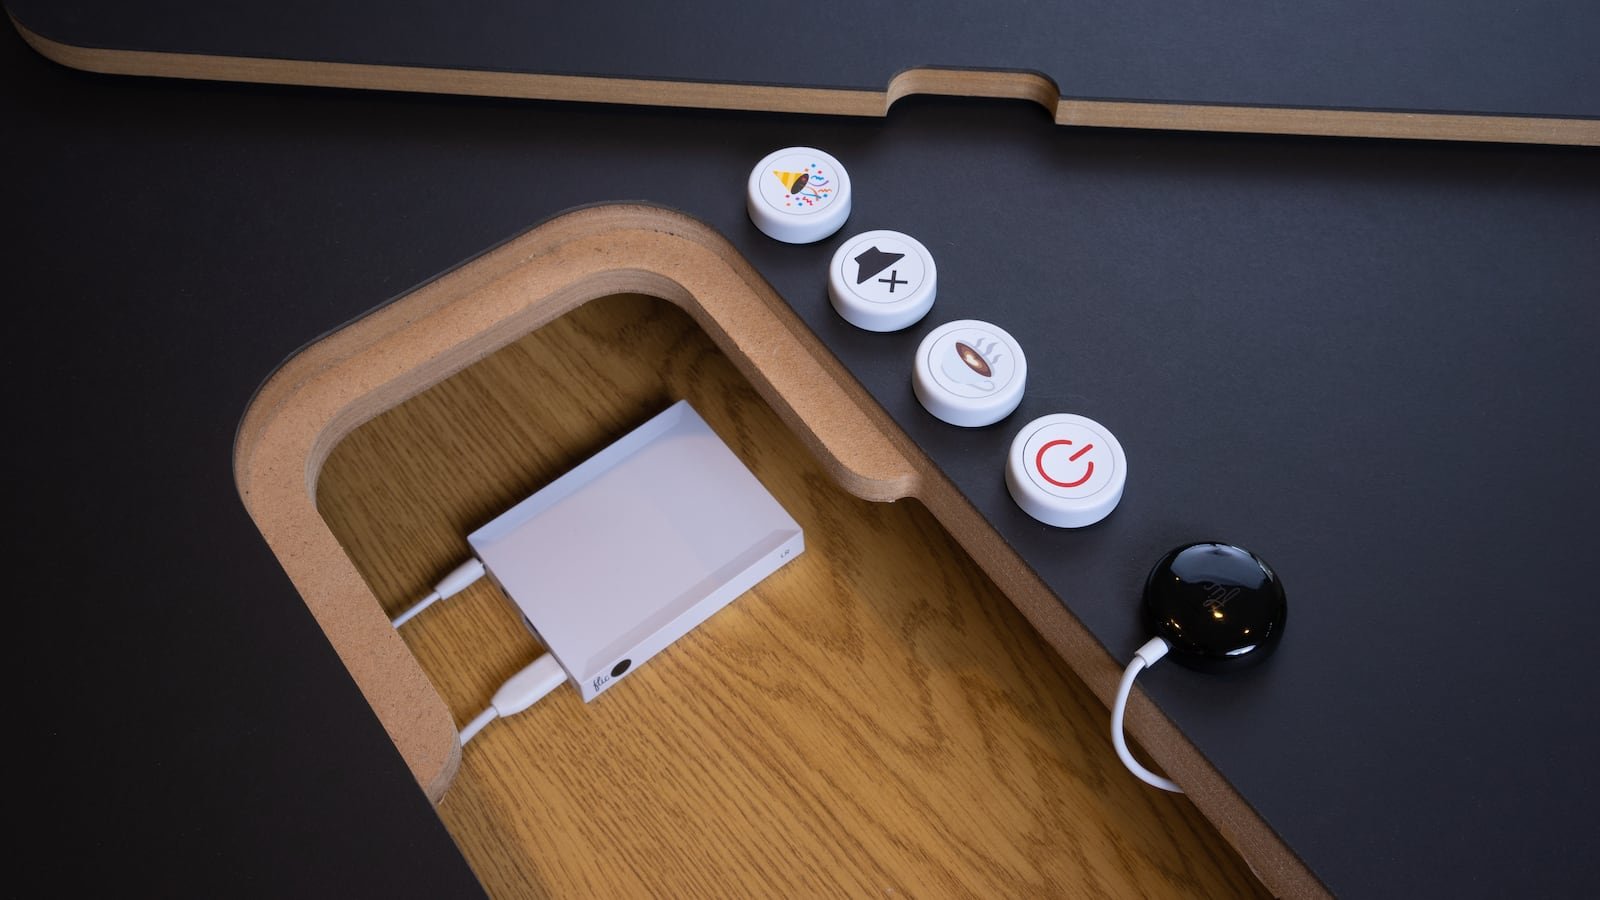 Flic 2 Smart Home Buttons Starter Kit controls your devices with the push of a button